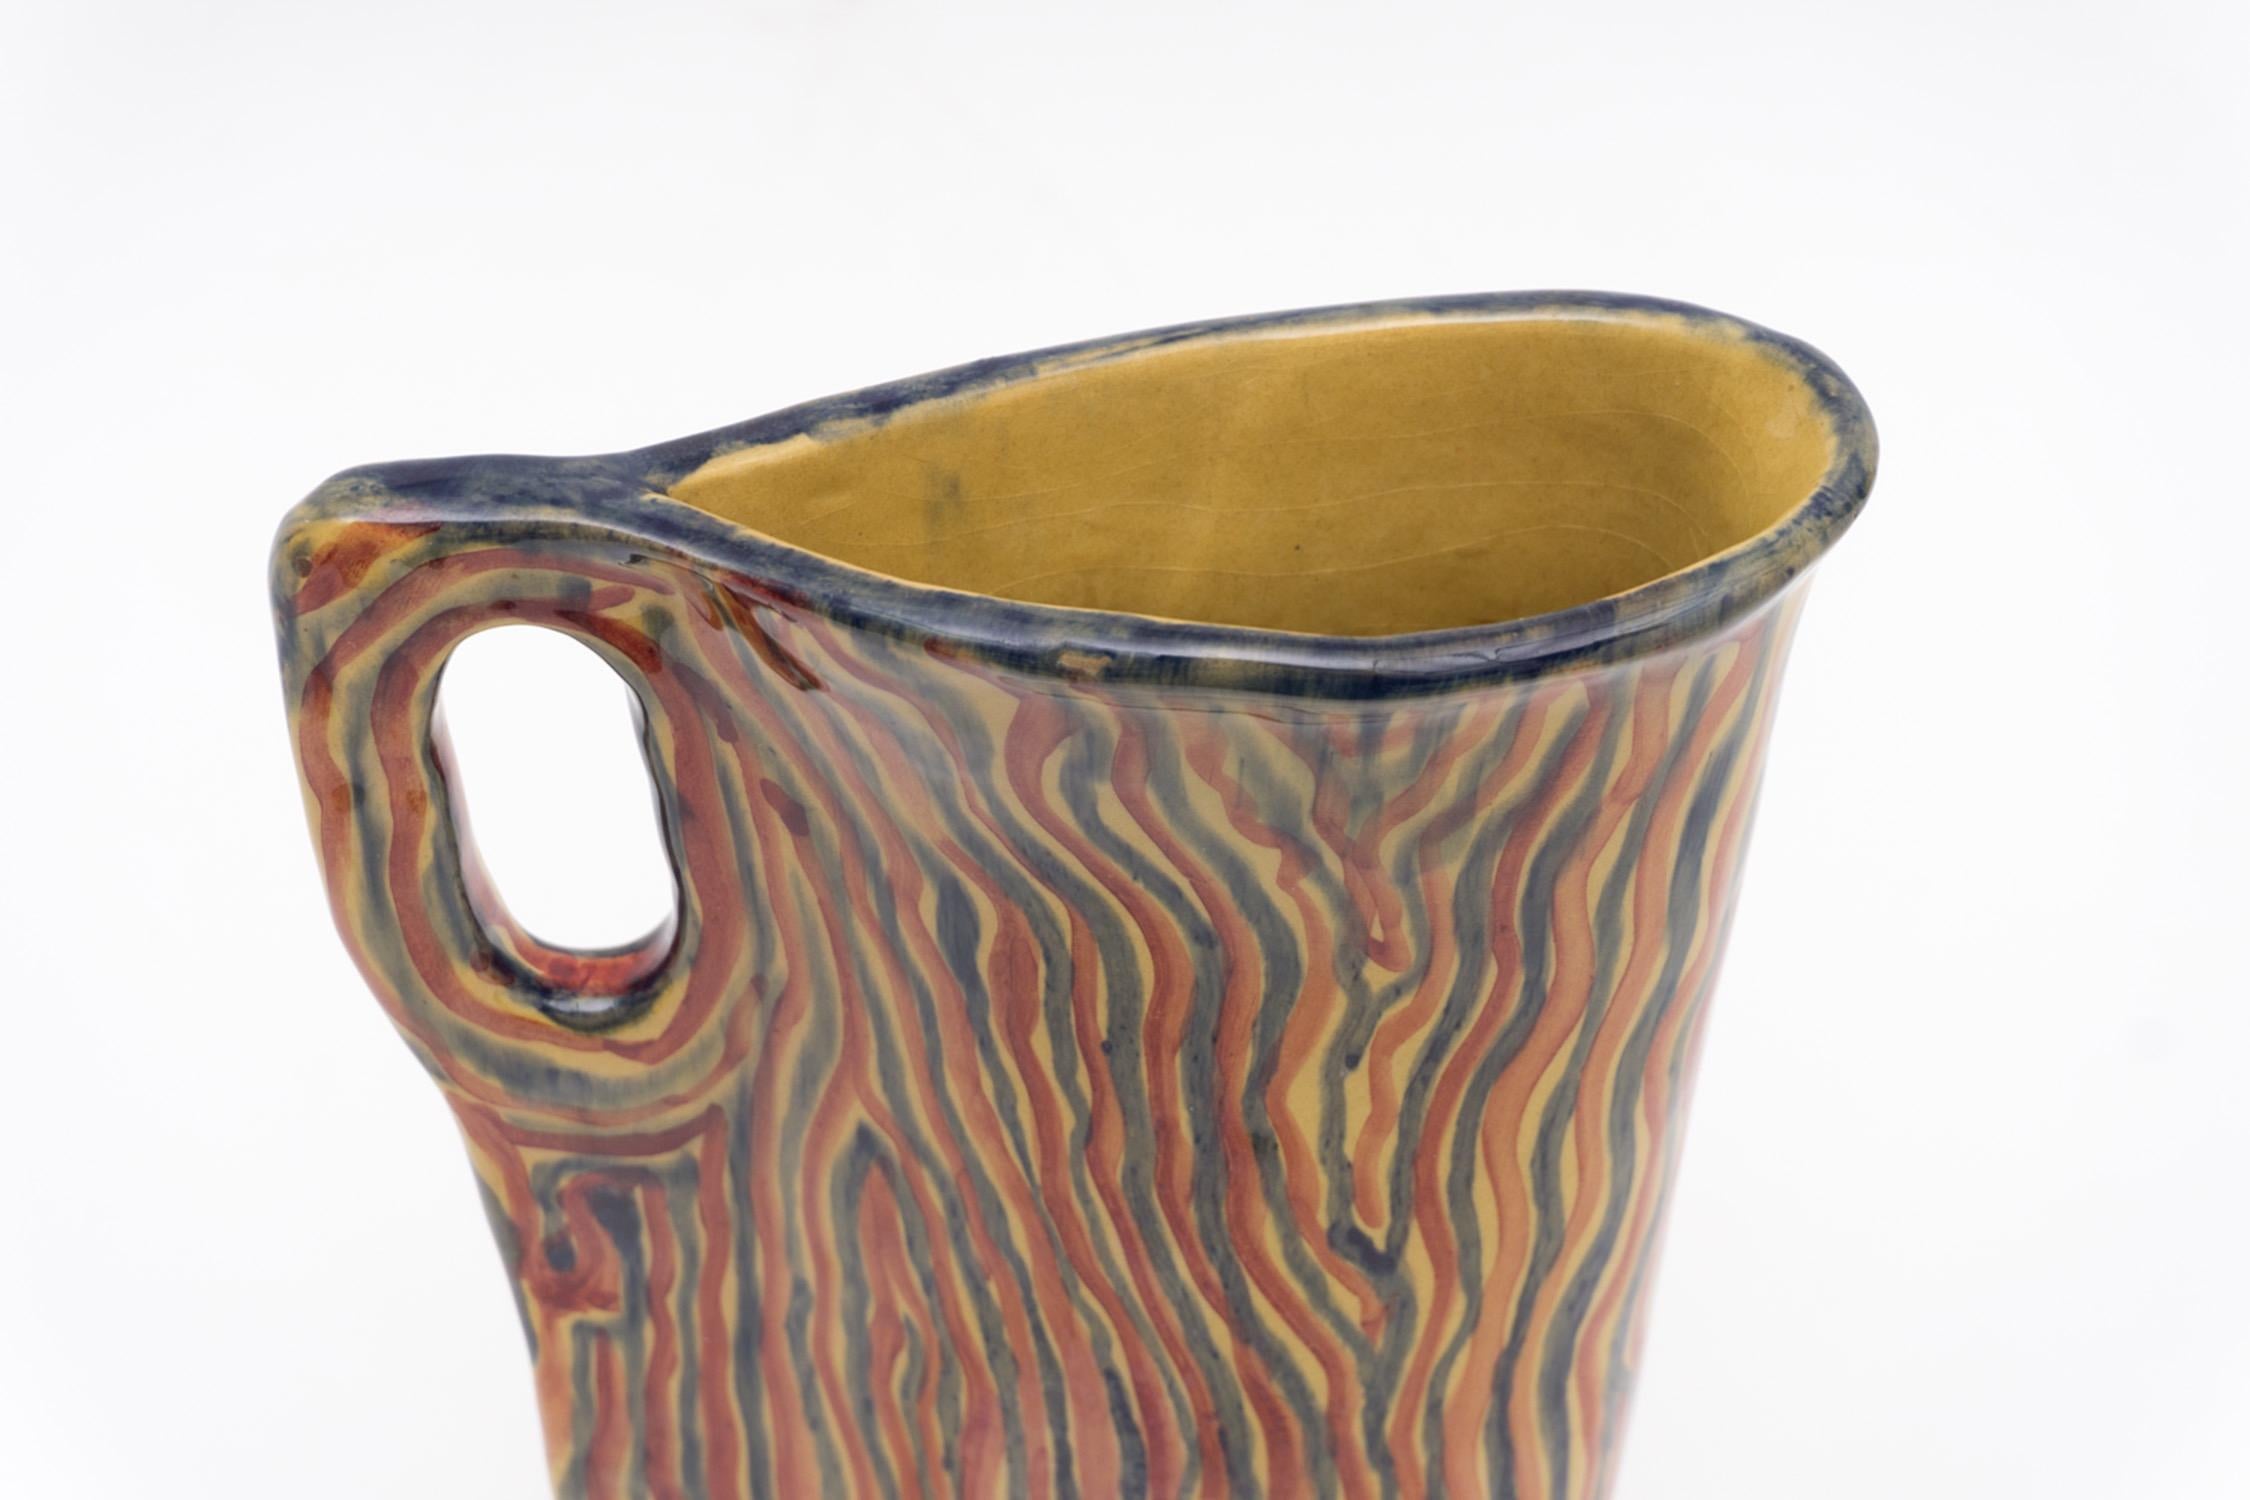 Italian Ceramic Pitcher with Colorful Decoration in Red, Blue and Yellow, Albisola, 1950 For Sale